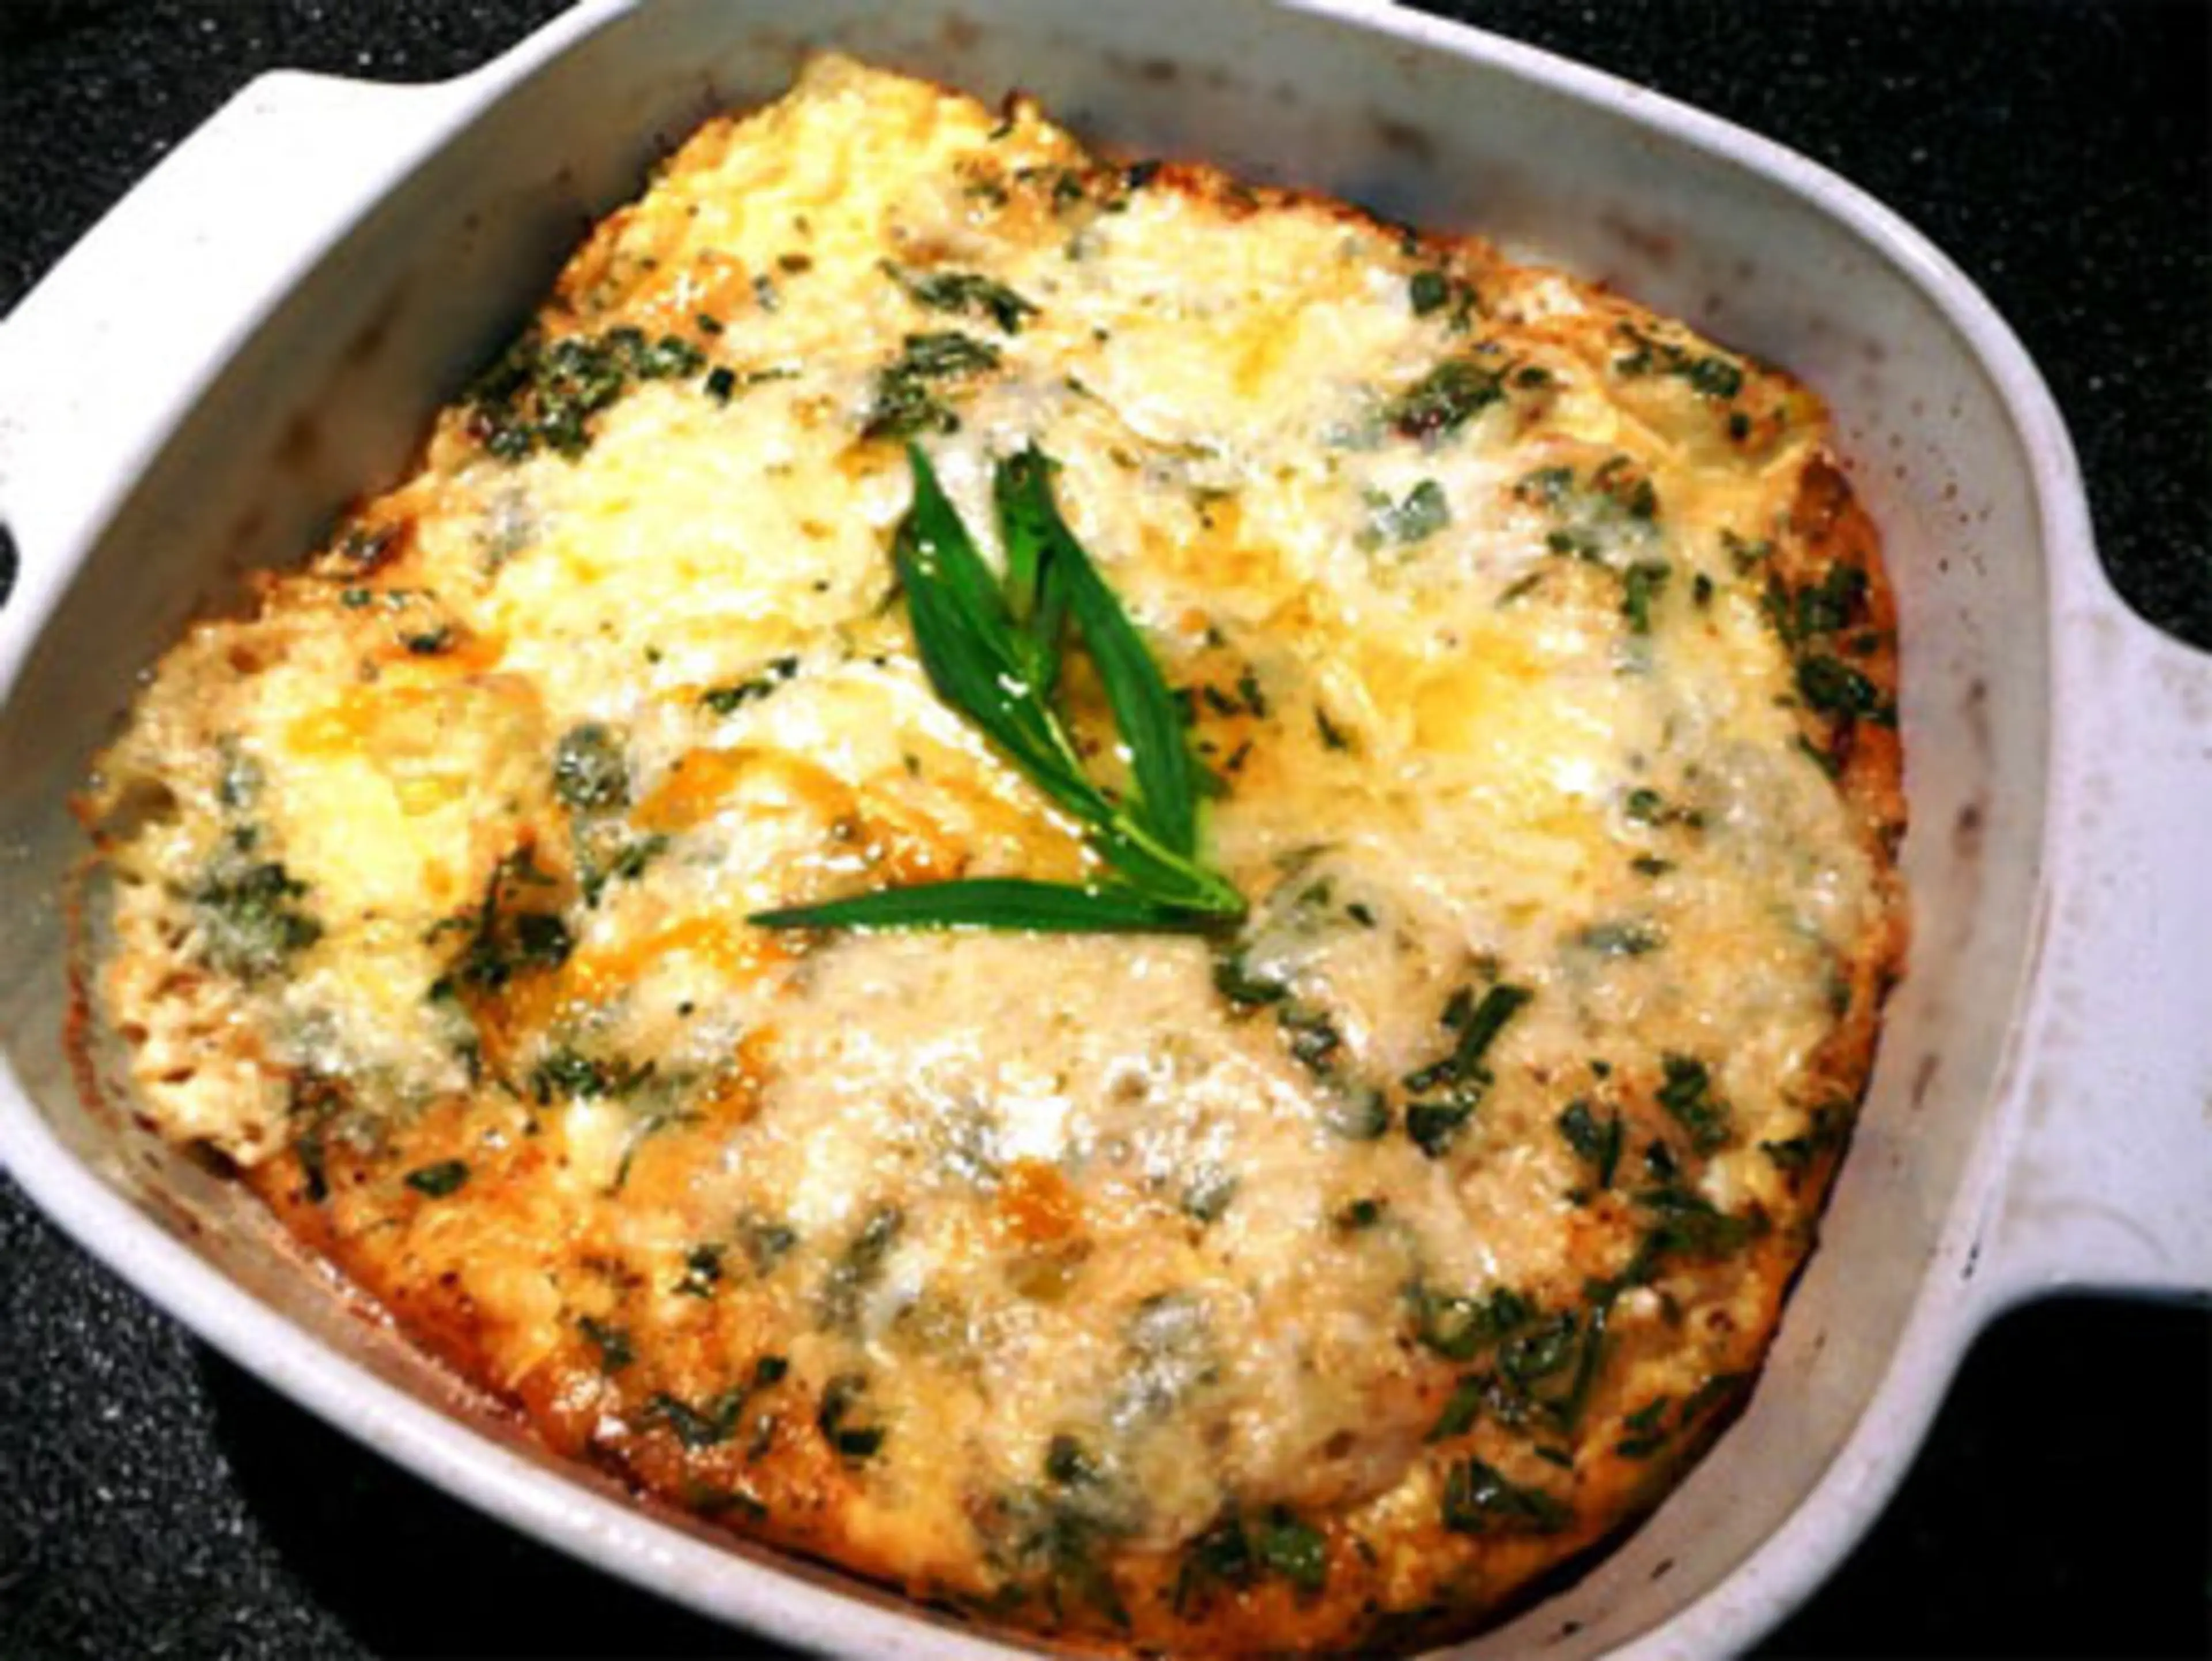 Baked Cheesy Eggs With Leeks and Tarragon